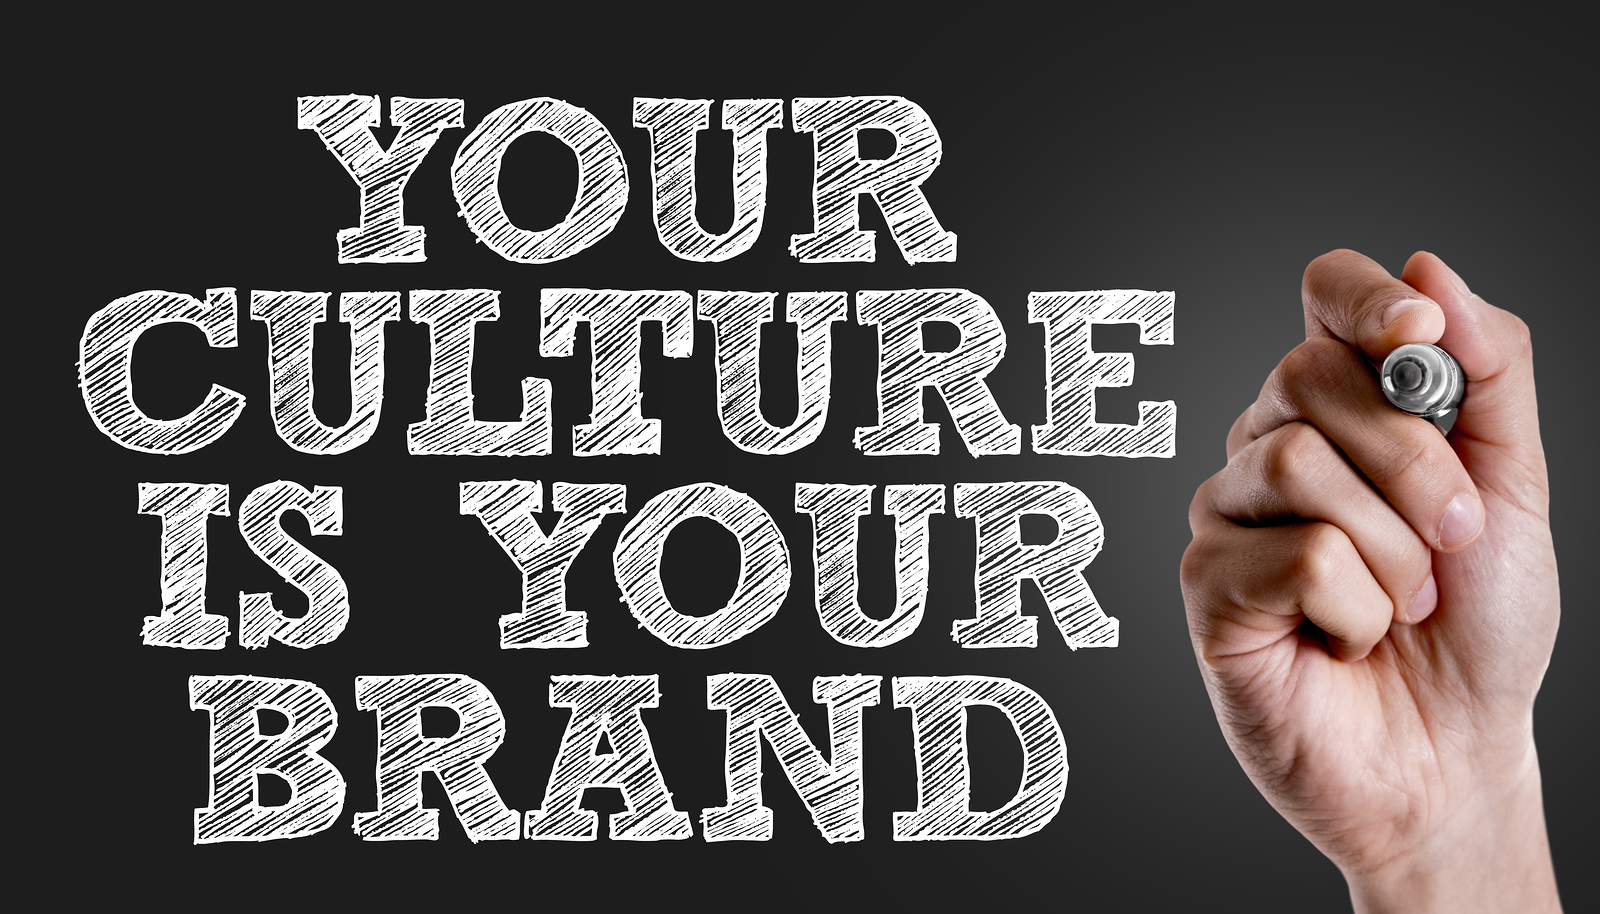 eMARK advantage: What is your company’s culture?